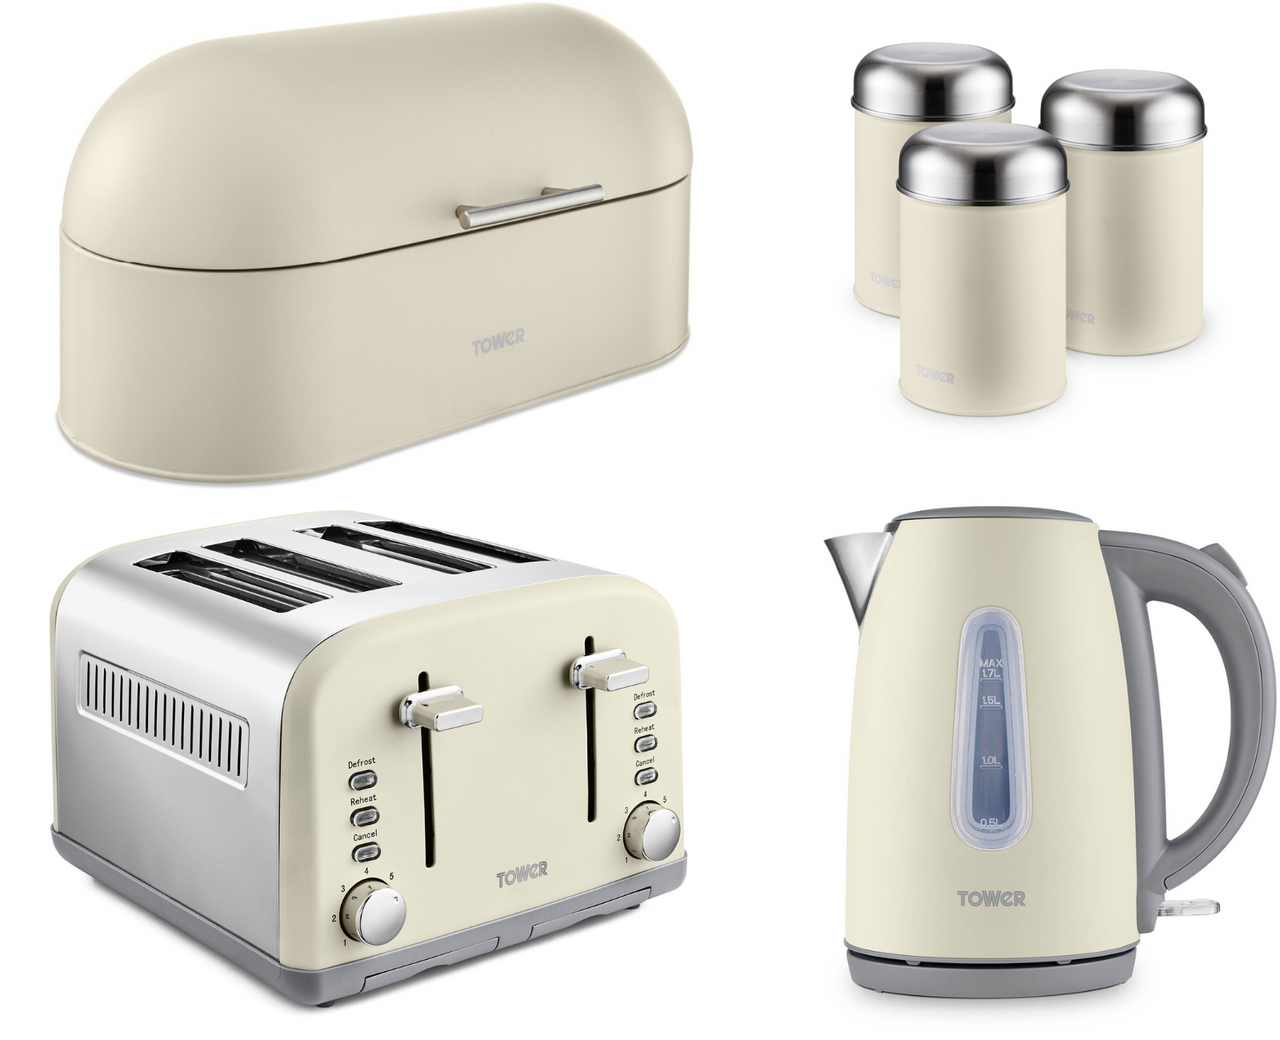 Tower Infinity Kettle 4 Slice Toaster Bread Bin & 3 Canisters Pebble Kitchen Set